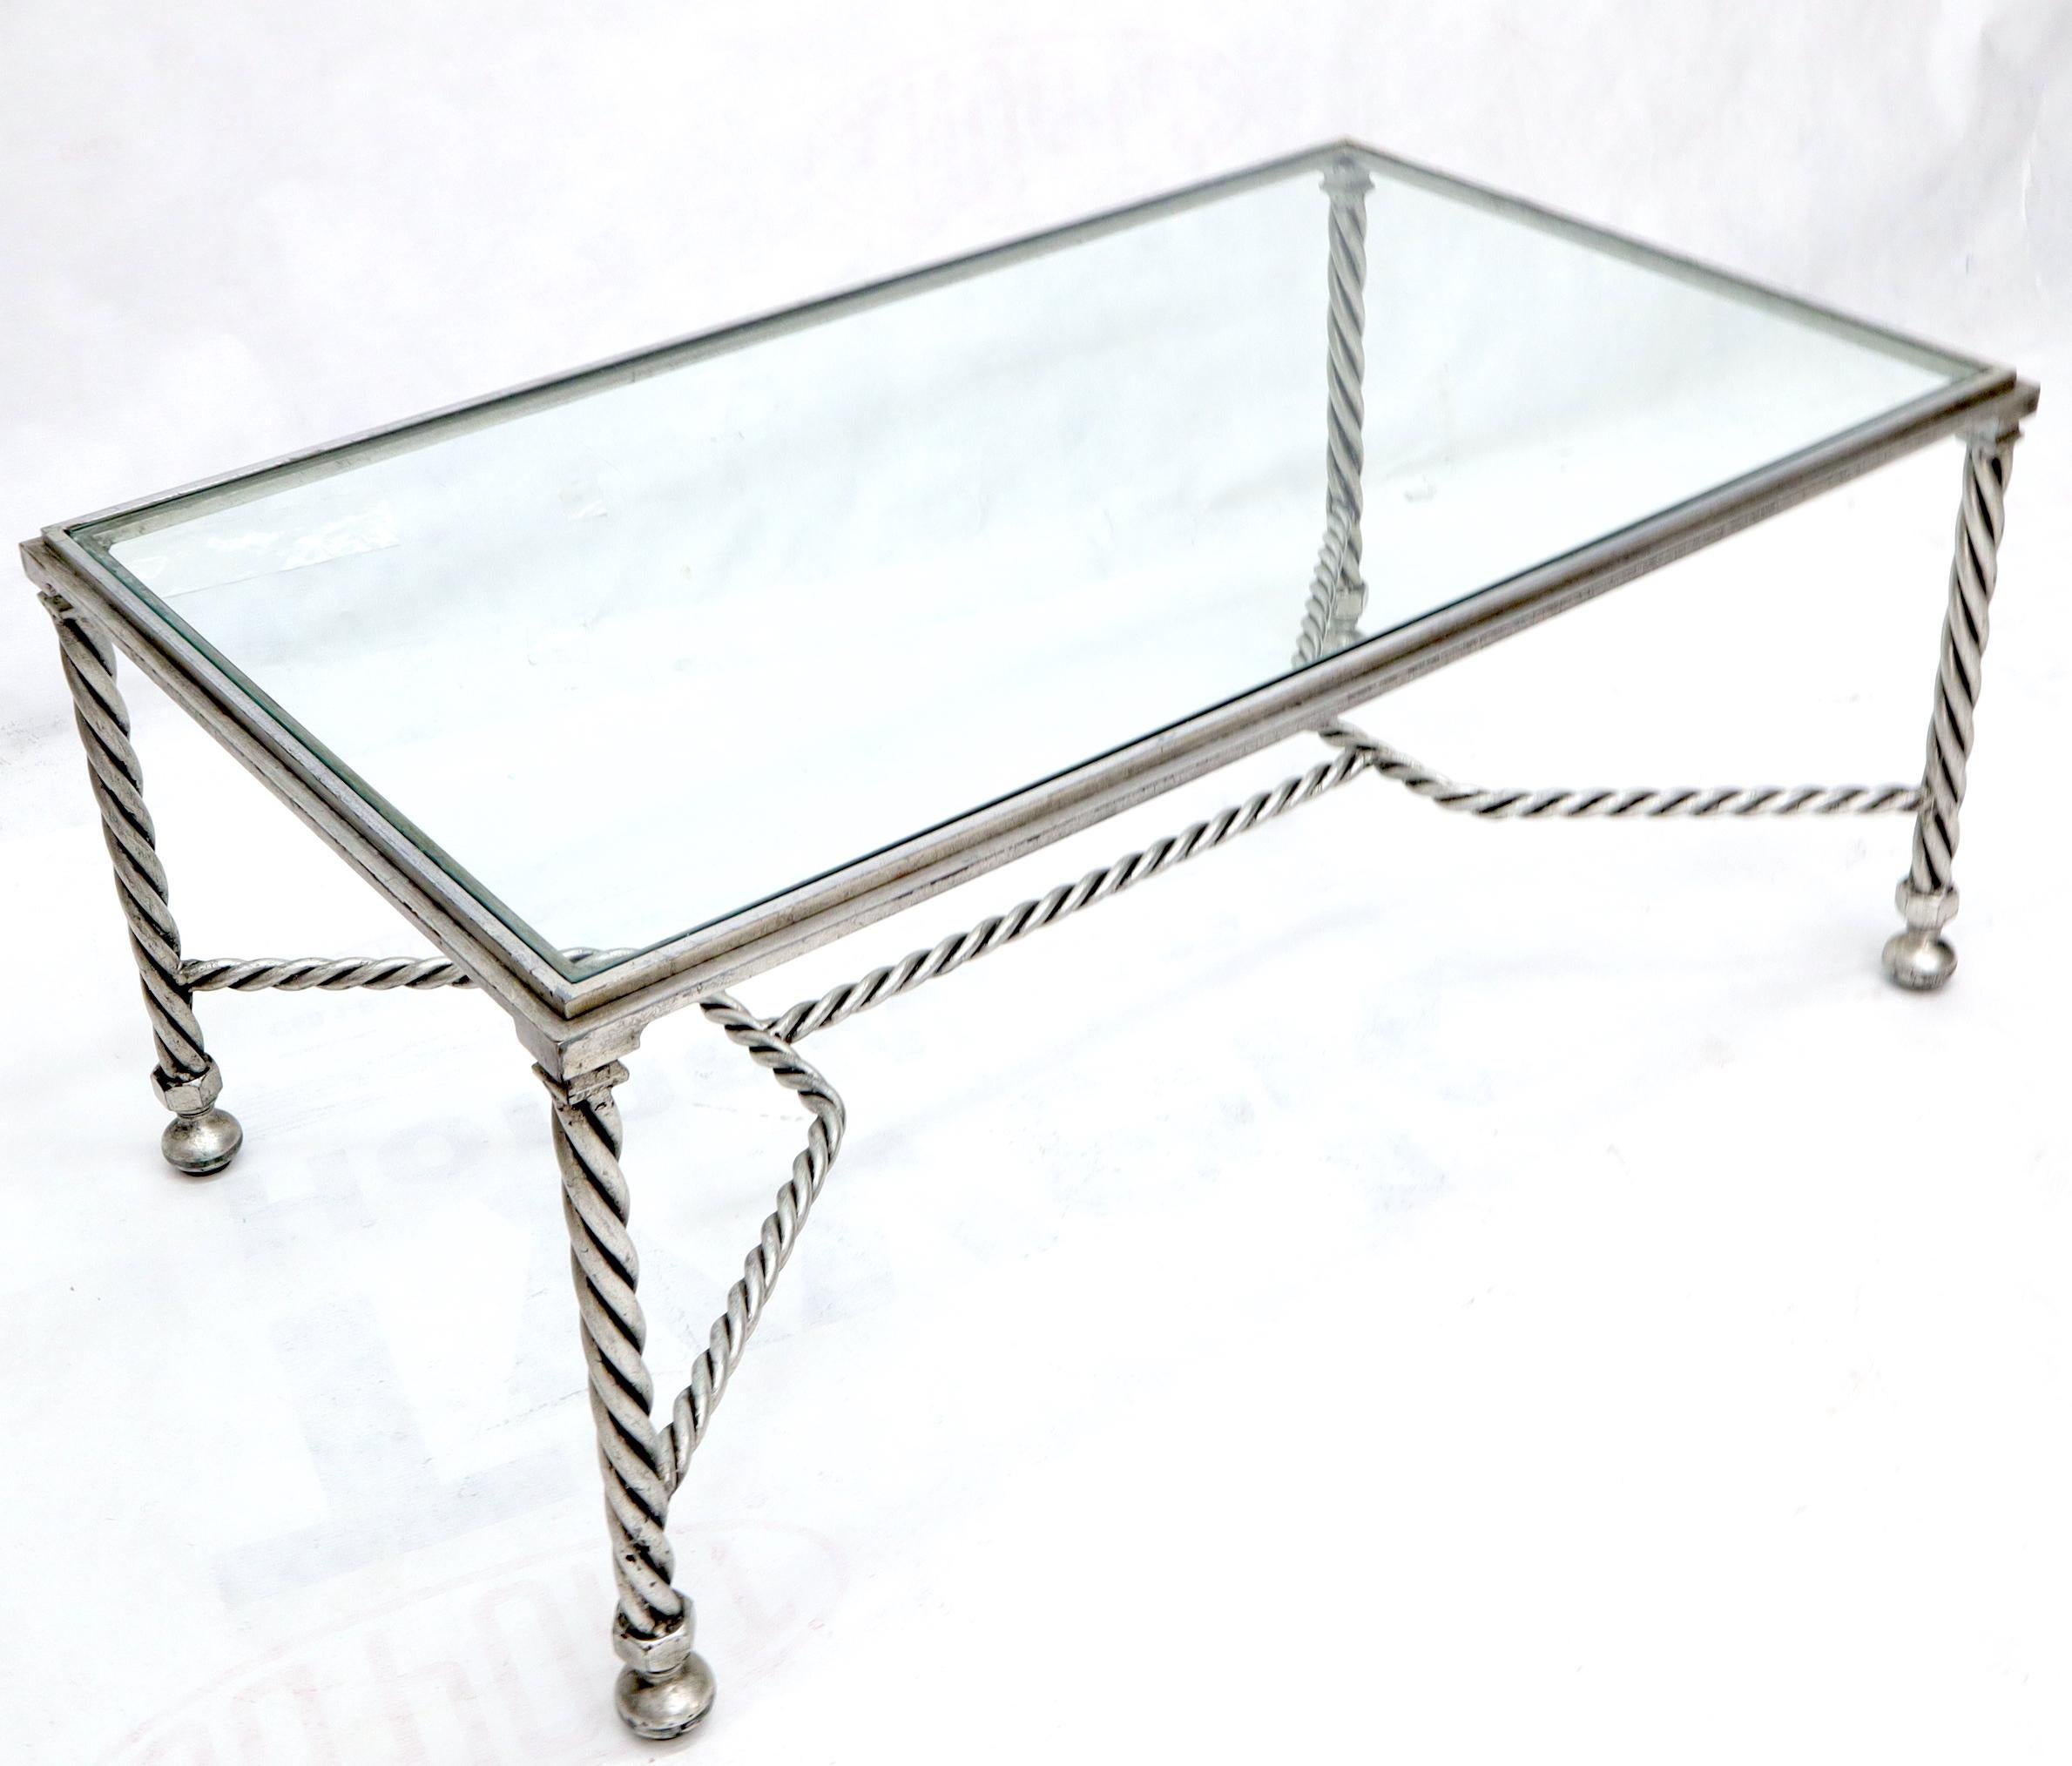 Forged Metal Twisted Rope Effect Silver Gilt Base Rectangle Coffee Table In Good Condition For Sale In Rockaway, NJ